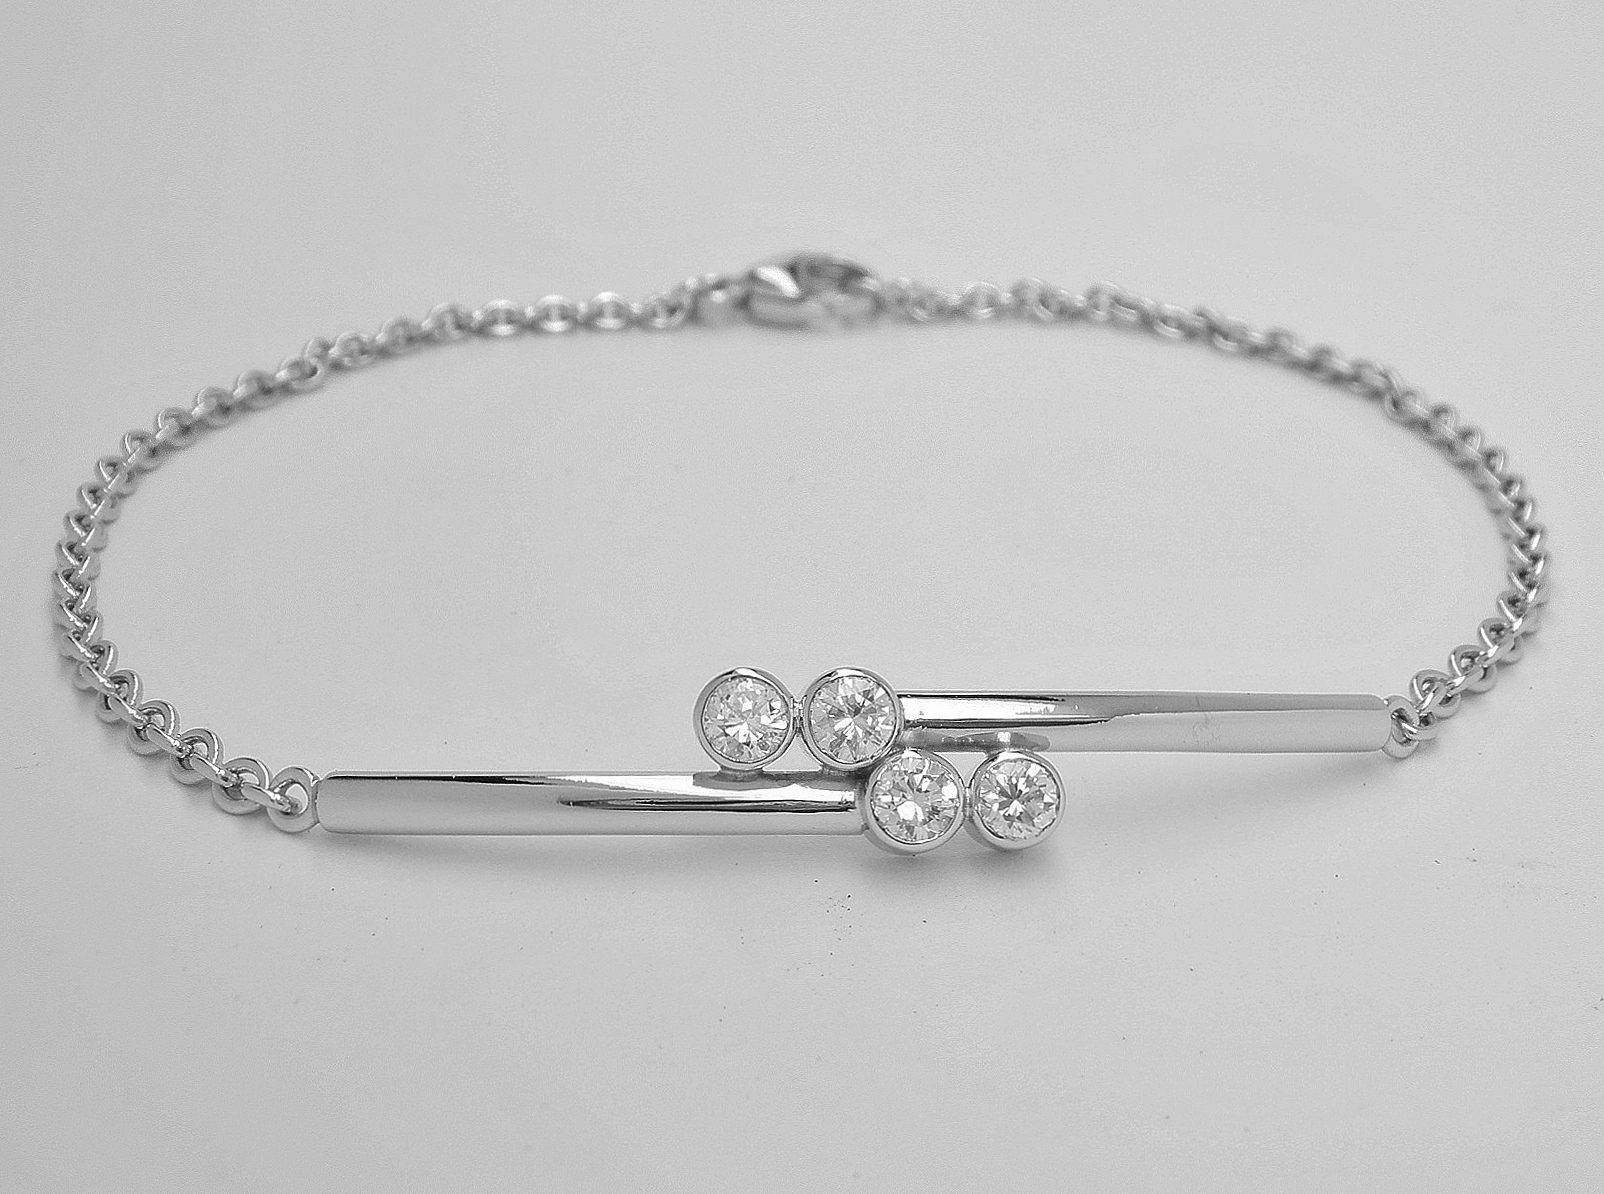 A 4 stone rub-over set round brilliant cut diamond cross-over style bracelet with centre solid panel mounted in platinum with platinum chain.